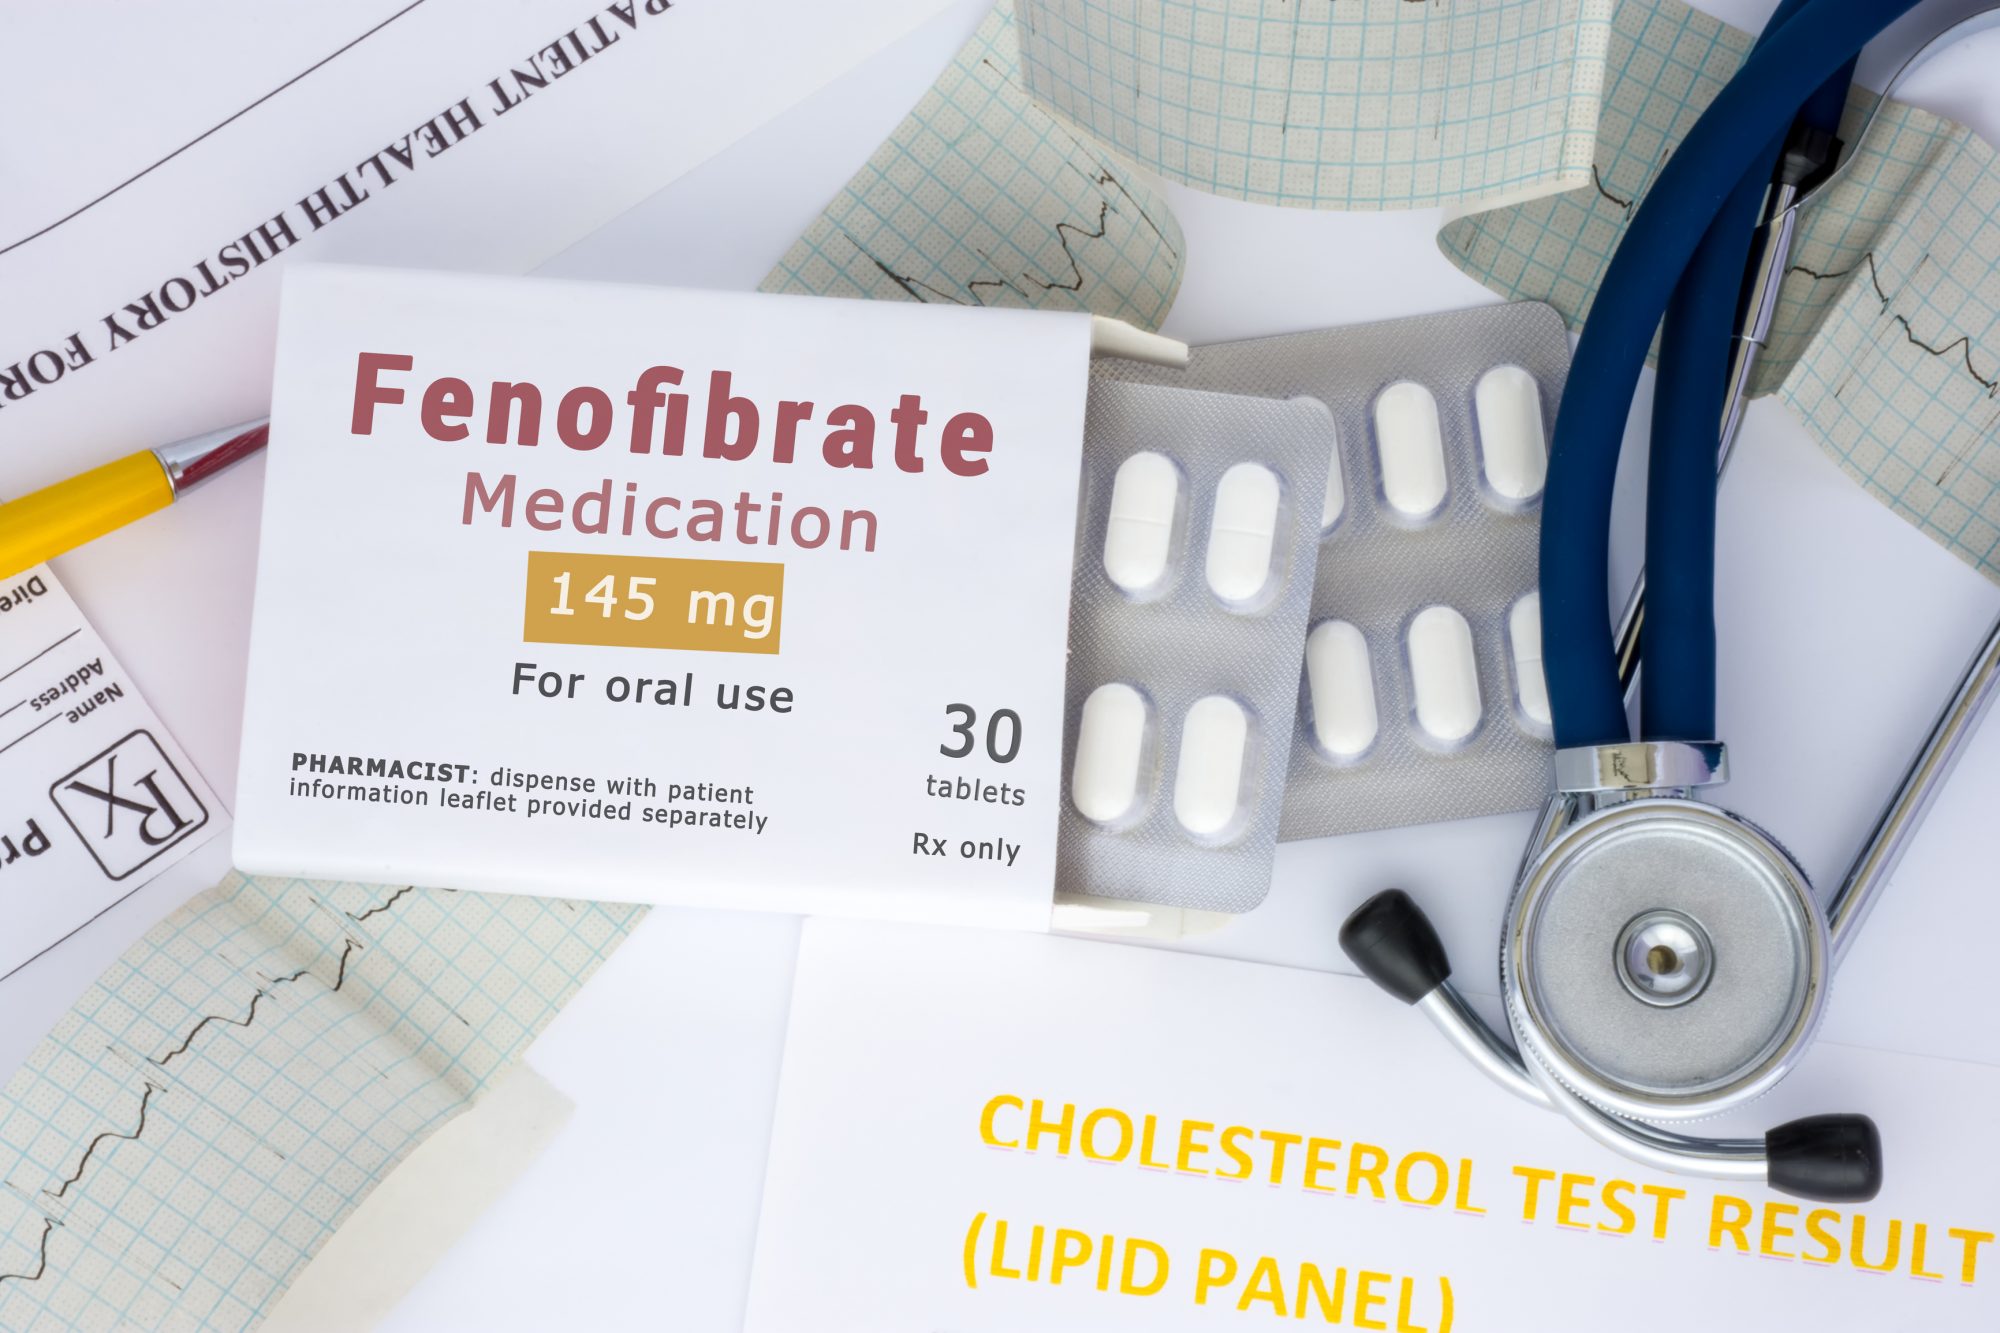 Fenofibrate could reduce COVID-19 infection by 70%